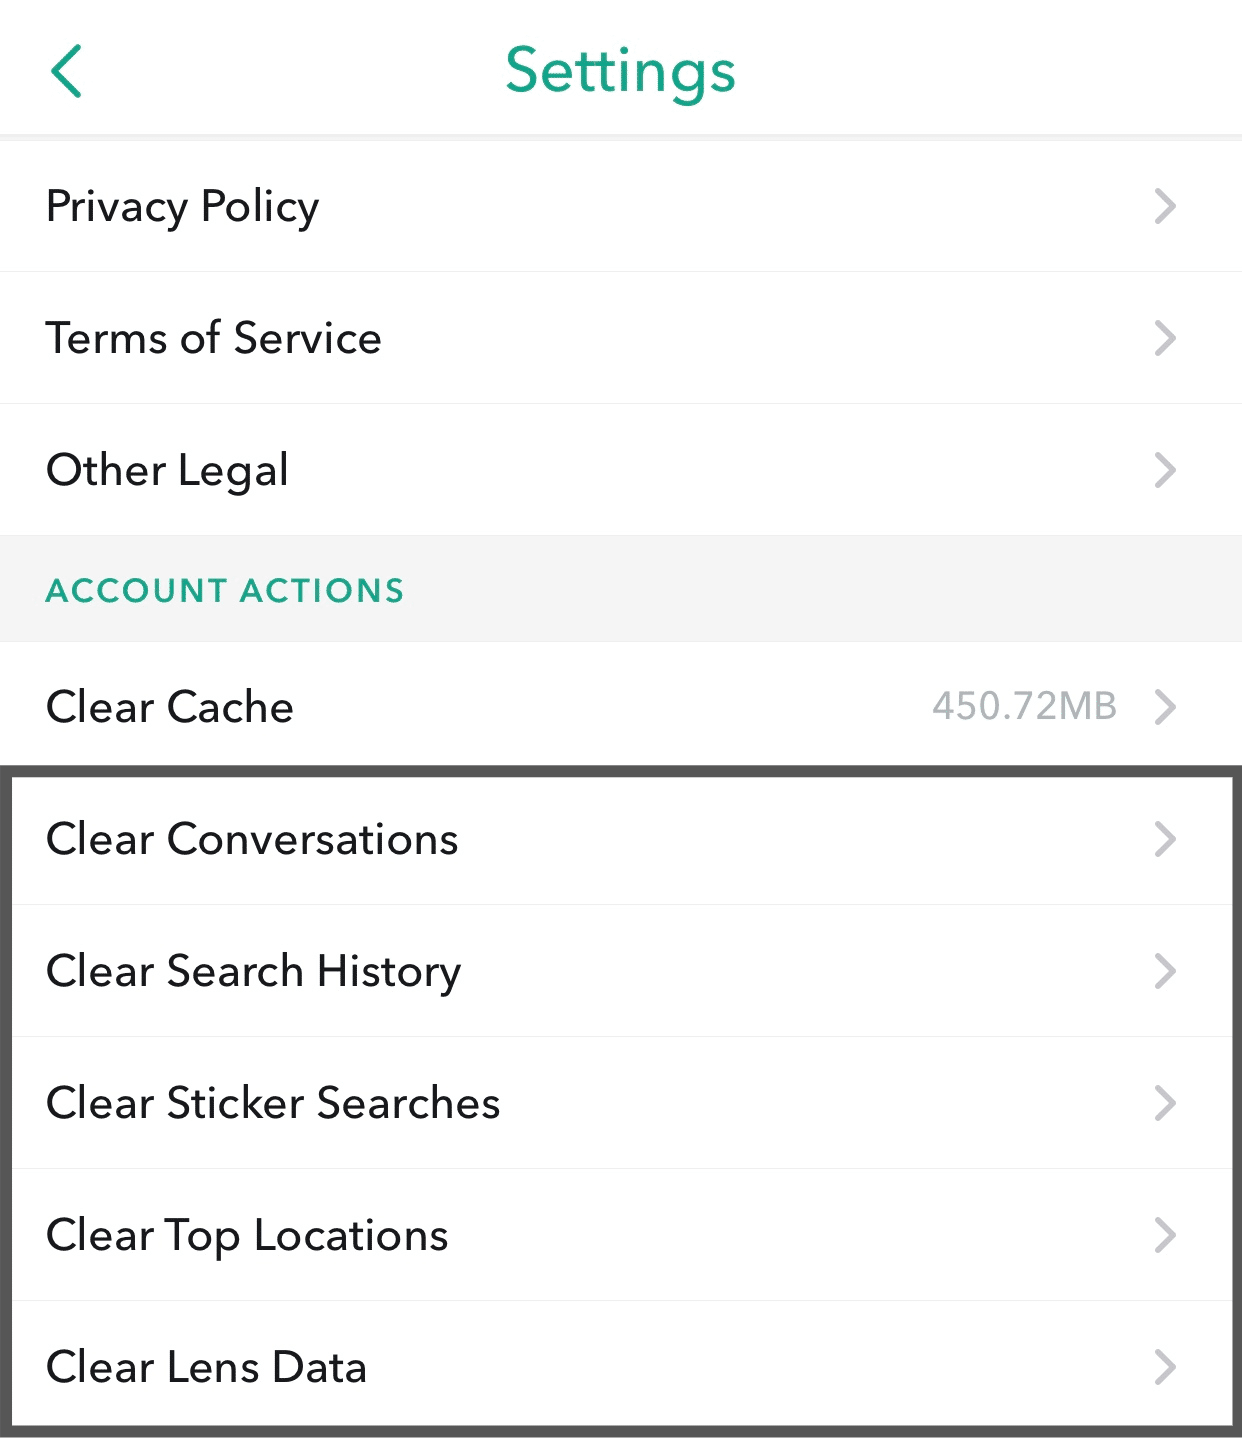 Clear Conversations, Search history, Sticker Searches, Top Locations and Lens Data in Snapchat app settings